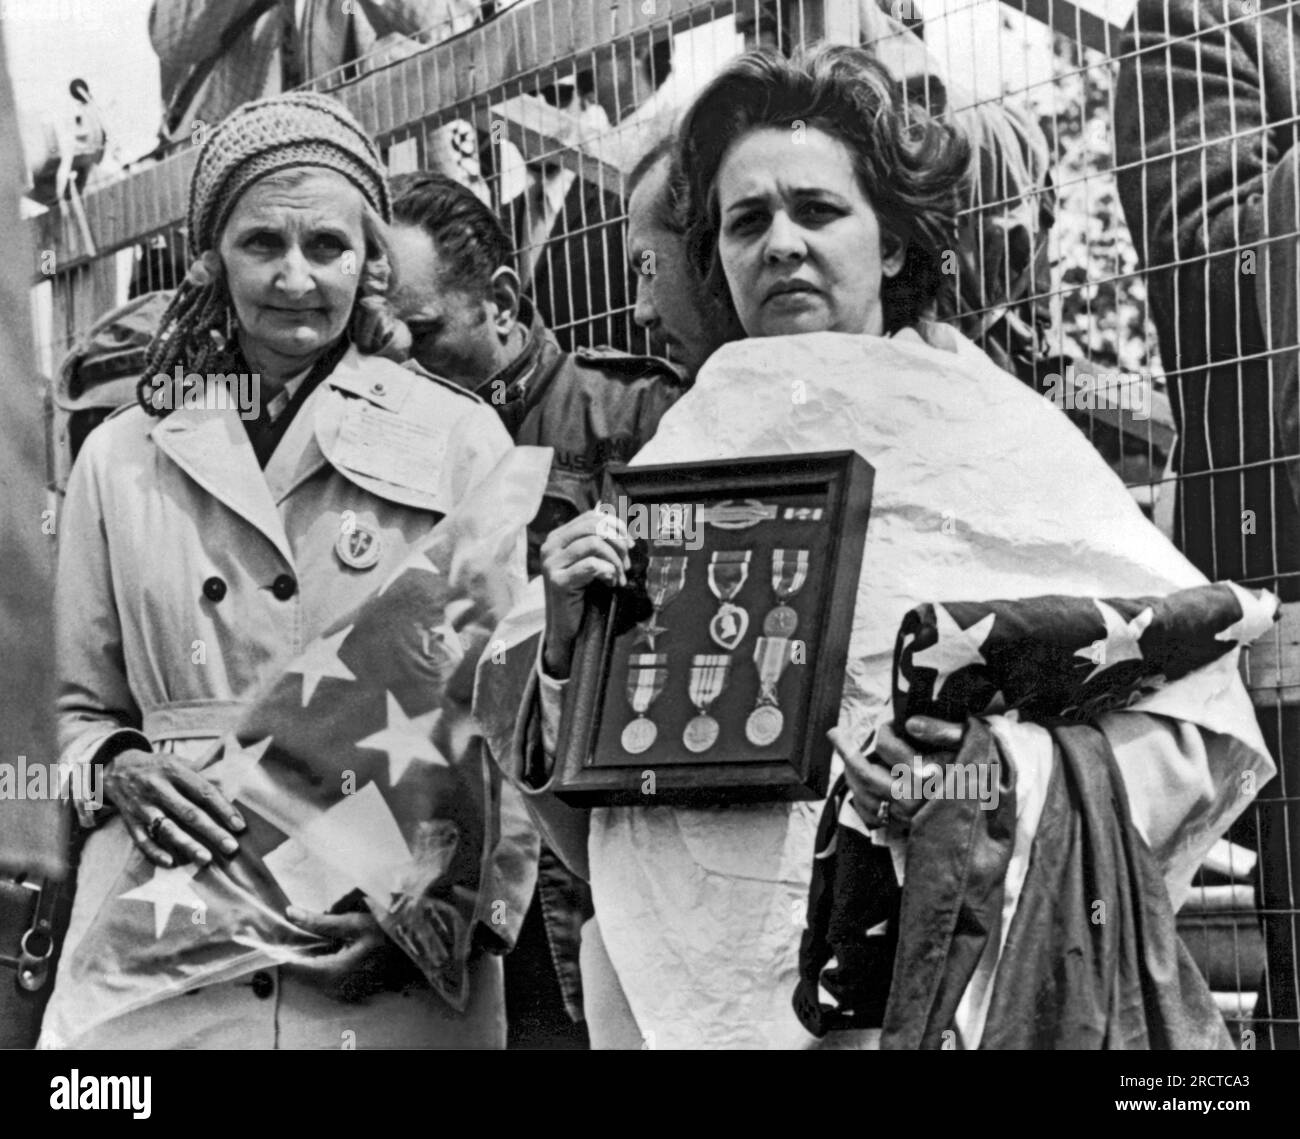 Washington, D.C.:  April 23, 1971 Two Gold Star mothers hold their dead sons' medals and flags at an anti Vietnam war protest near the Capitol today. They are Anna Pine (L) of Trenton, New Jersey and Evelyn Carrasquillo of Miami, Florida. Fred Pine and Alberto Carrasquillo were killed in Vietnam in 1968. Stock Photo